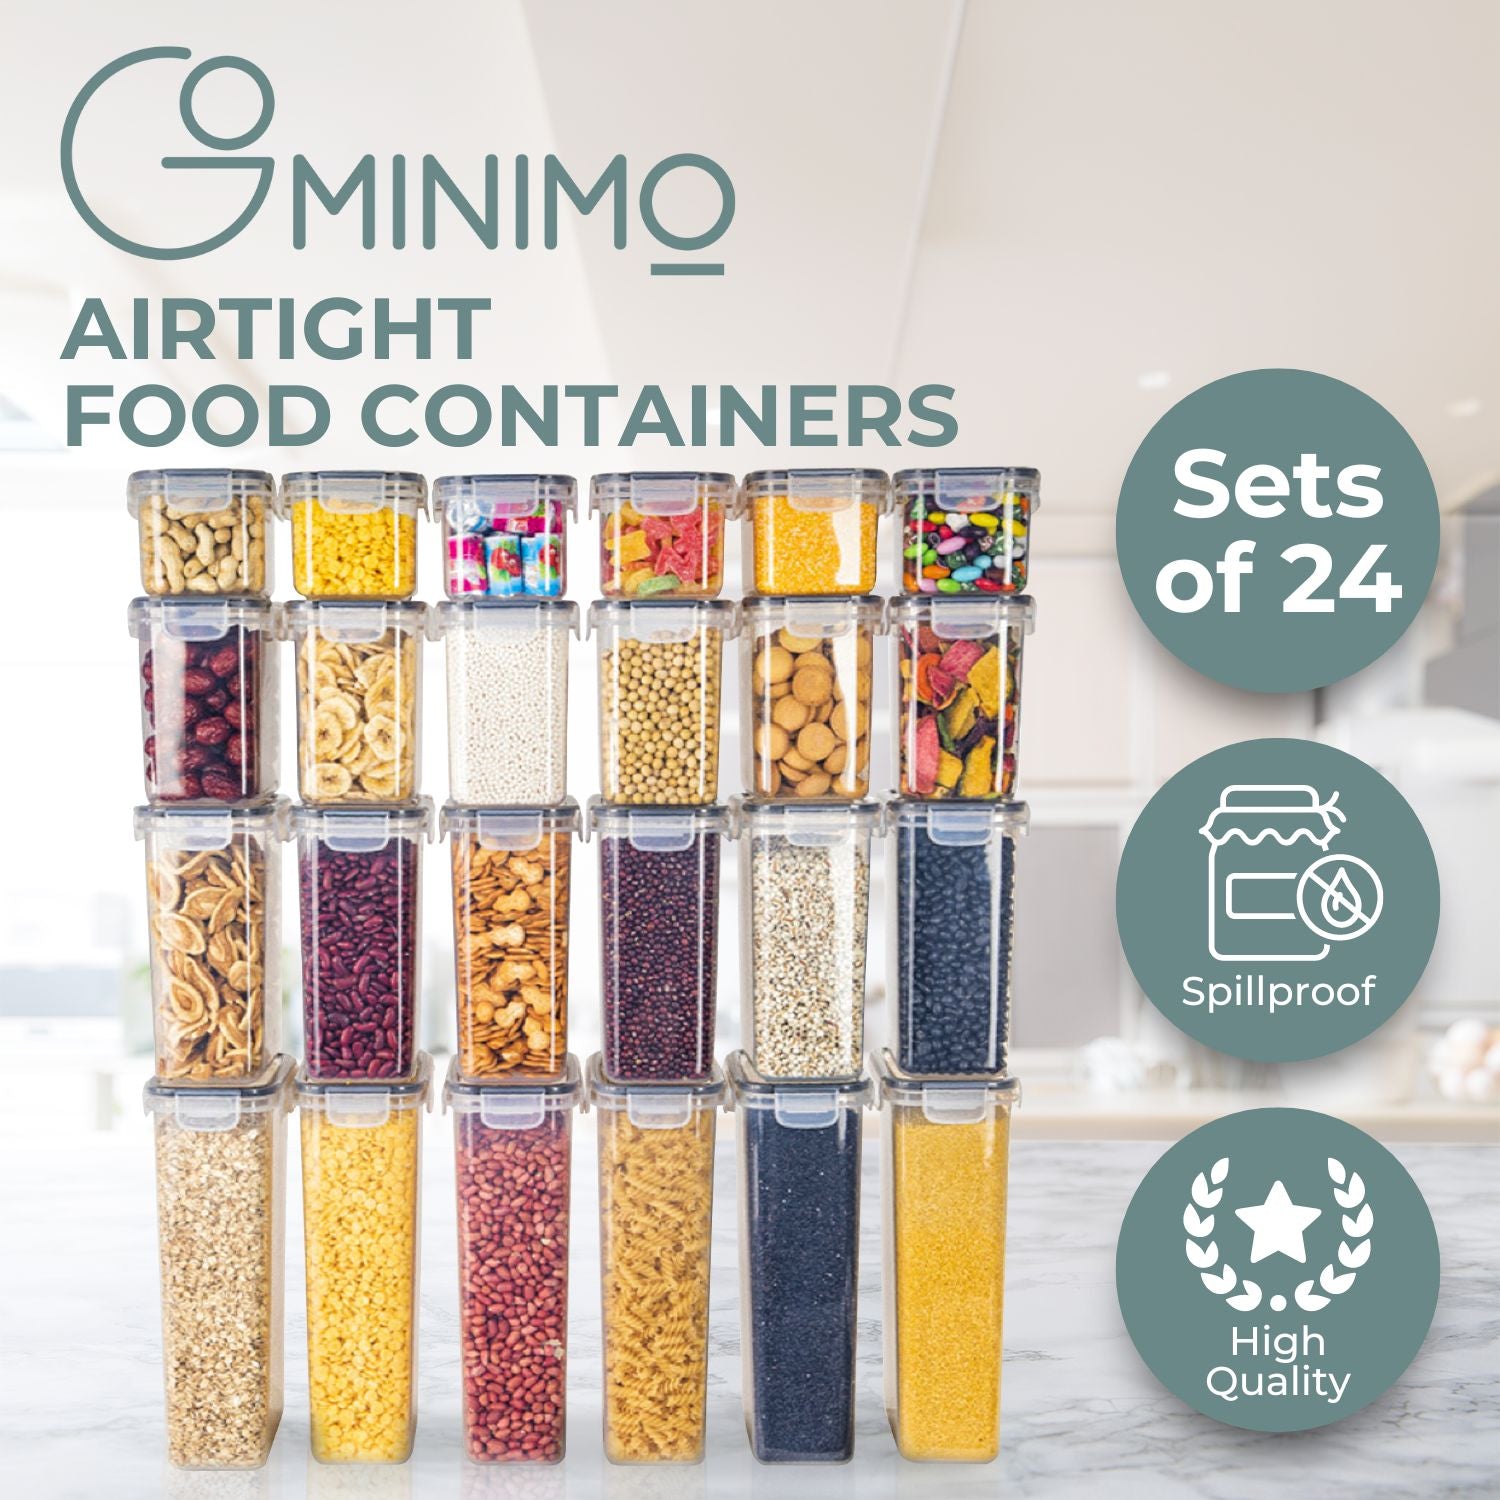 Gominimo 24PCS Airtight Food Storage Containers Kitchen Dry Food Pantry Organization Set